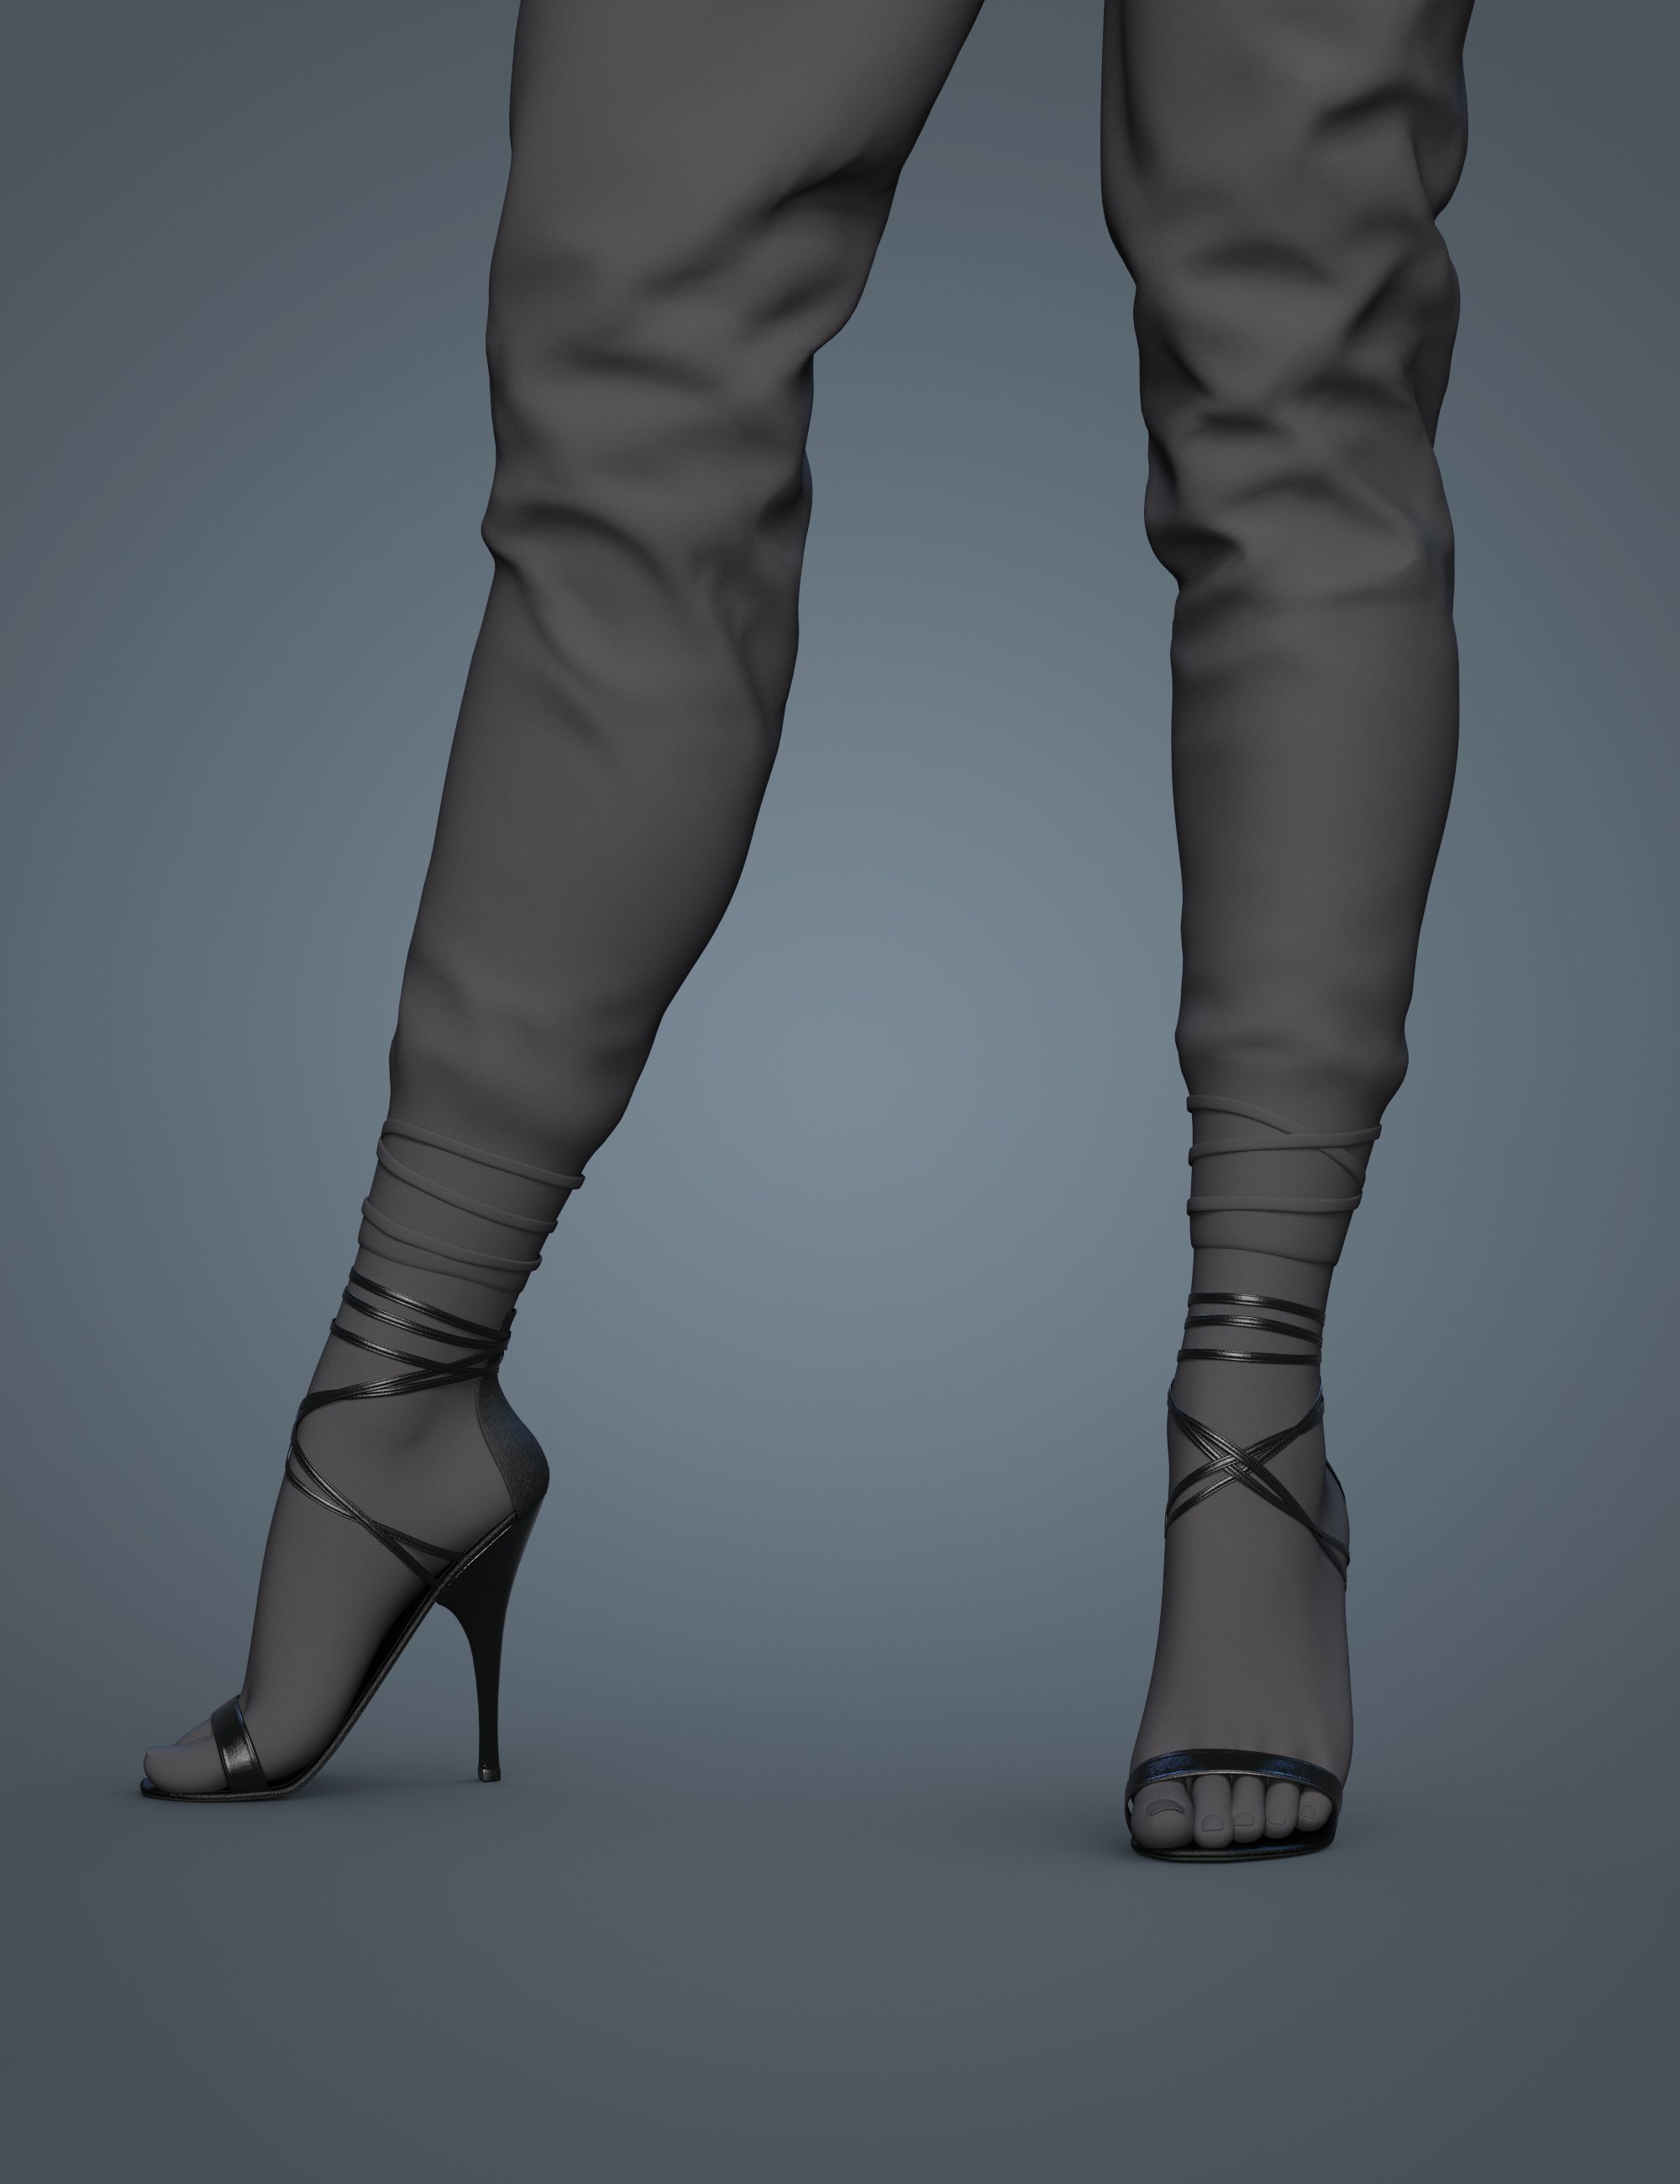 Trending Socials Shoes for Genesis 8 and 8.1 Females by: Nikisatez, 3D Models by Daz 3D